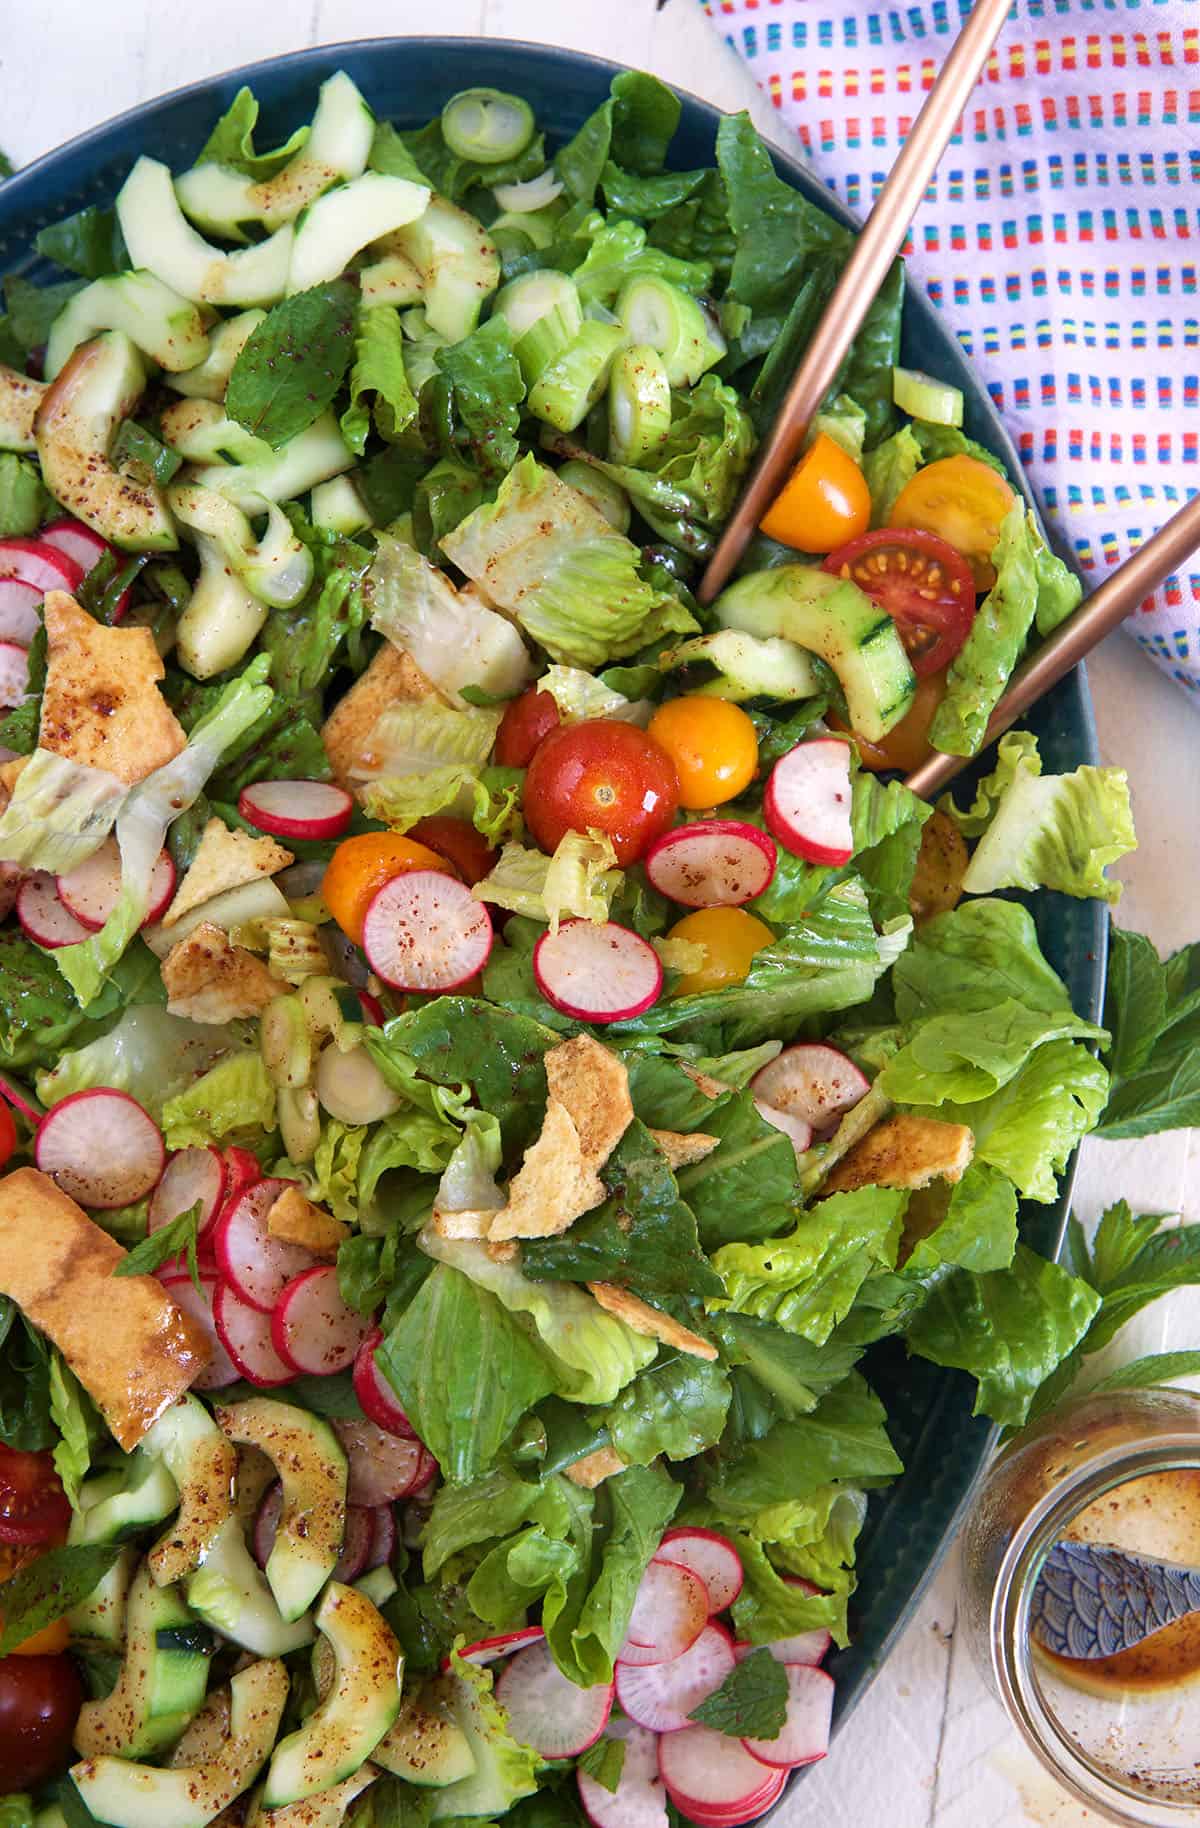 A tossed salad is presented in a large oval shaped serving dish.